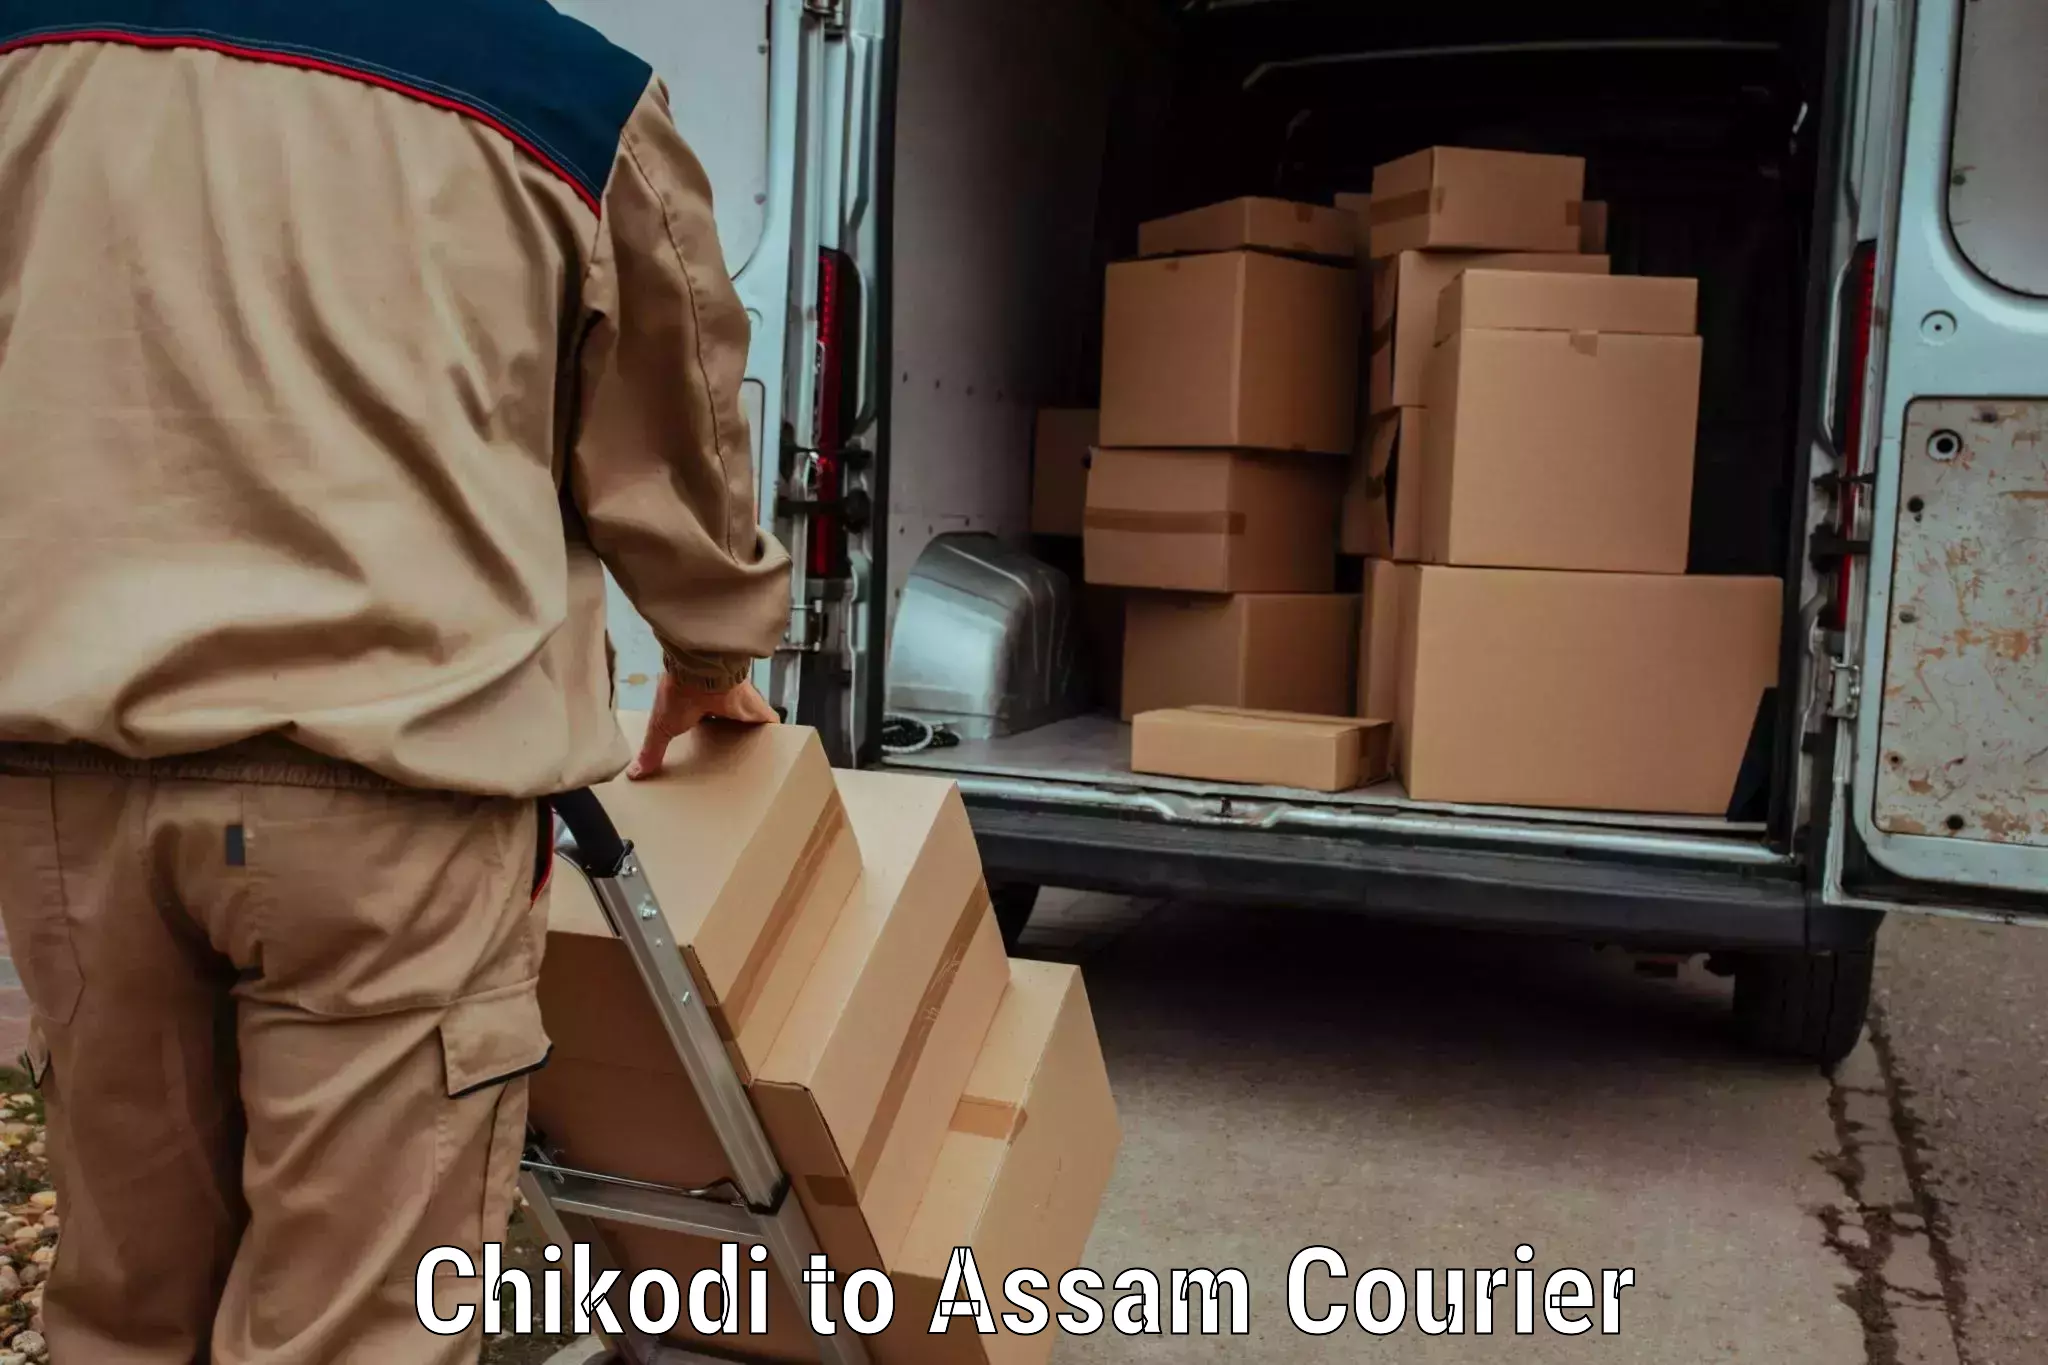 Local delivery service Chikodi to Lala Assam